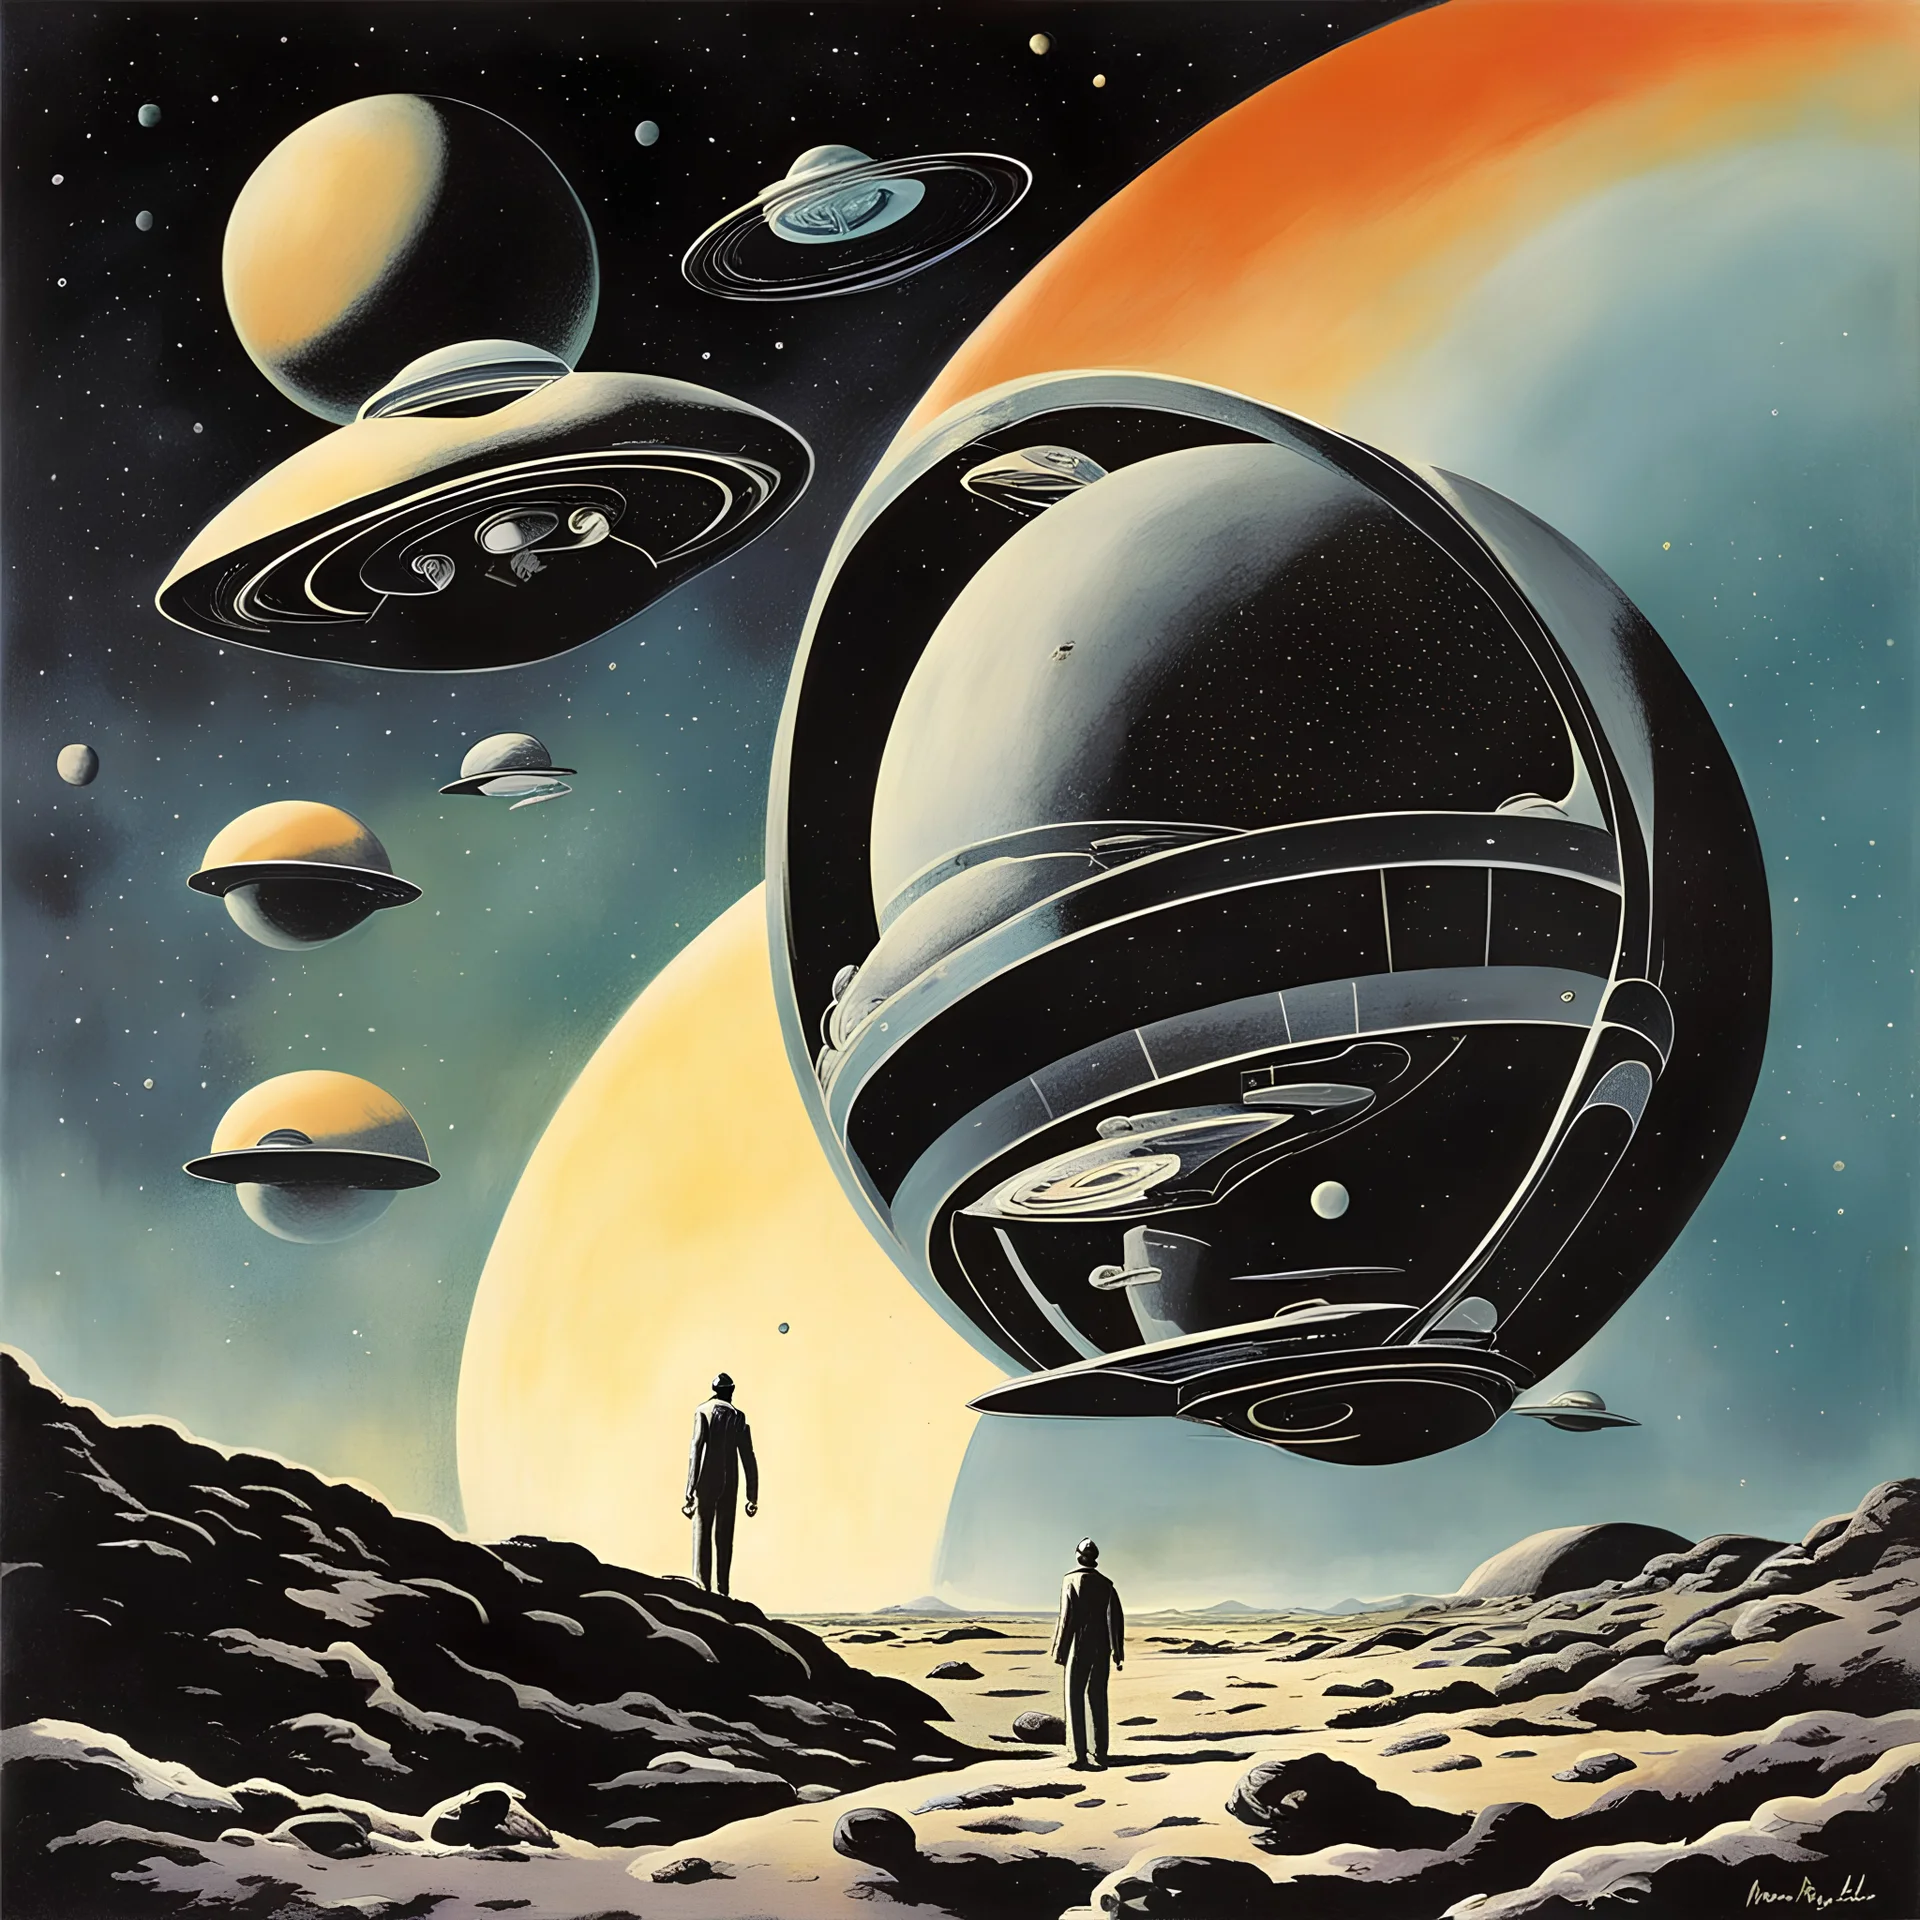 by Norman Bel Geddes, space opera, futuristic surrealism, weird, color ink illustration, dark spacy colors.